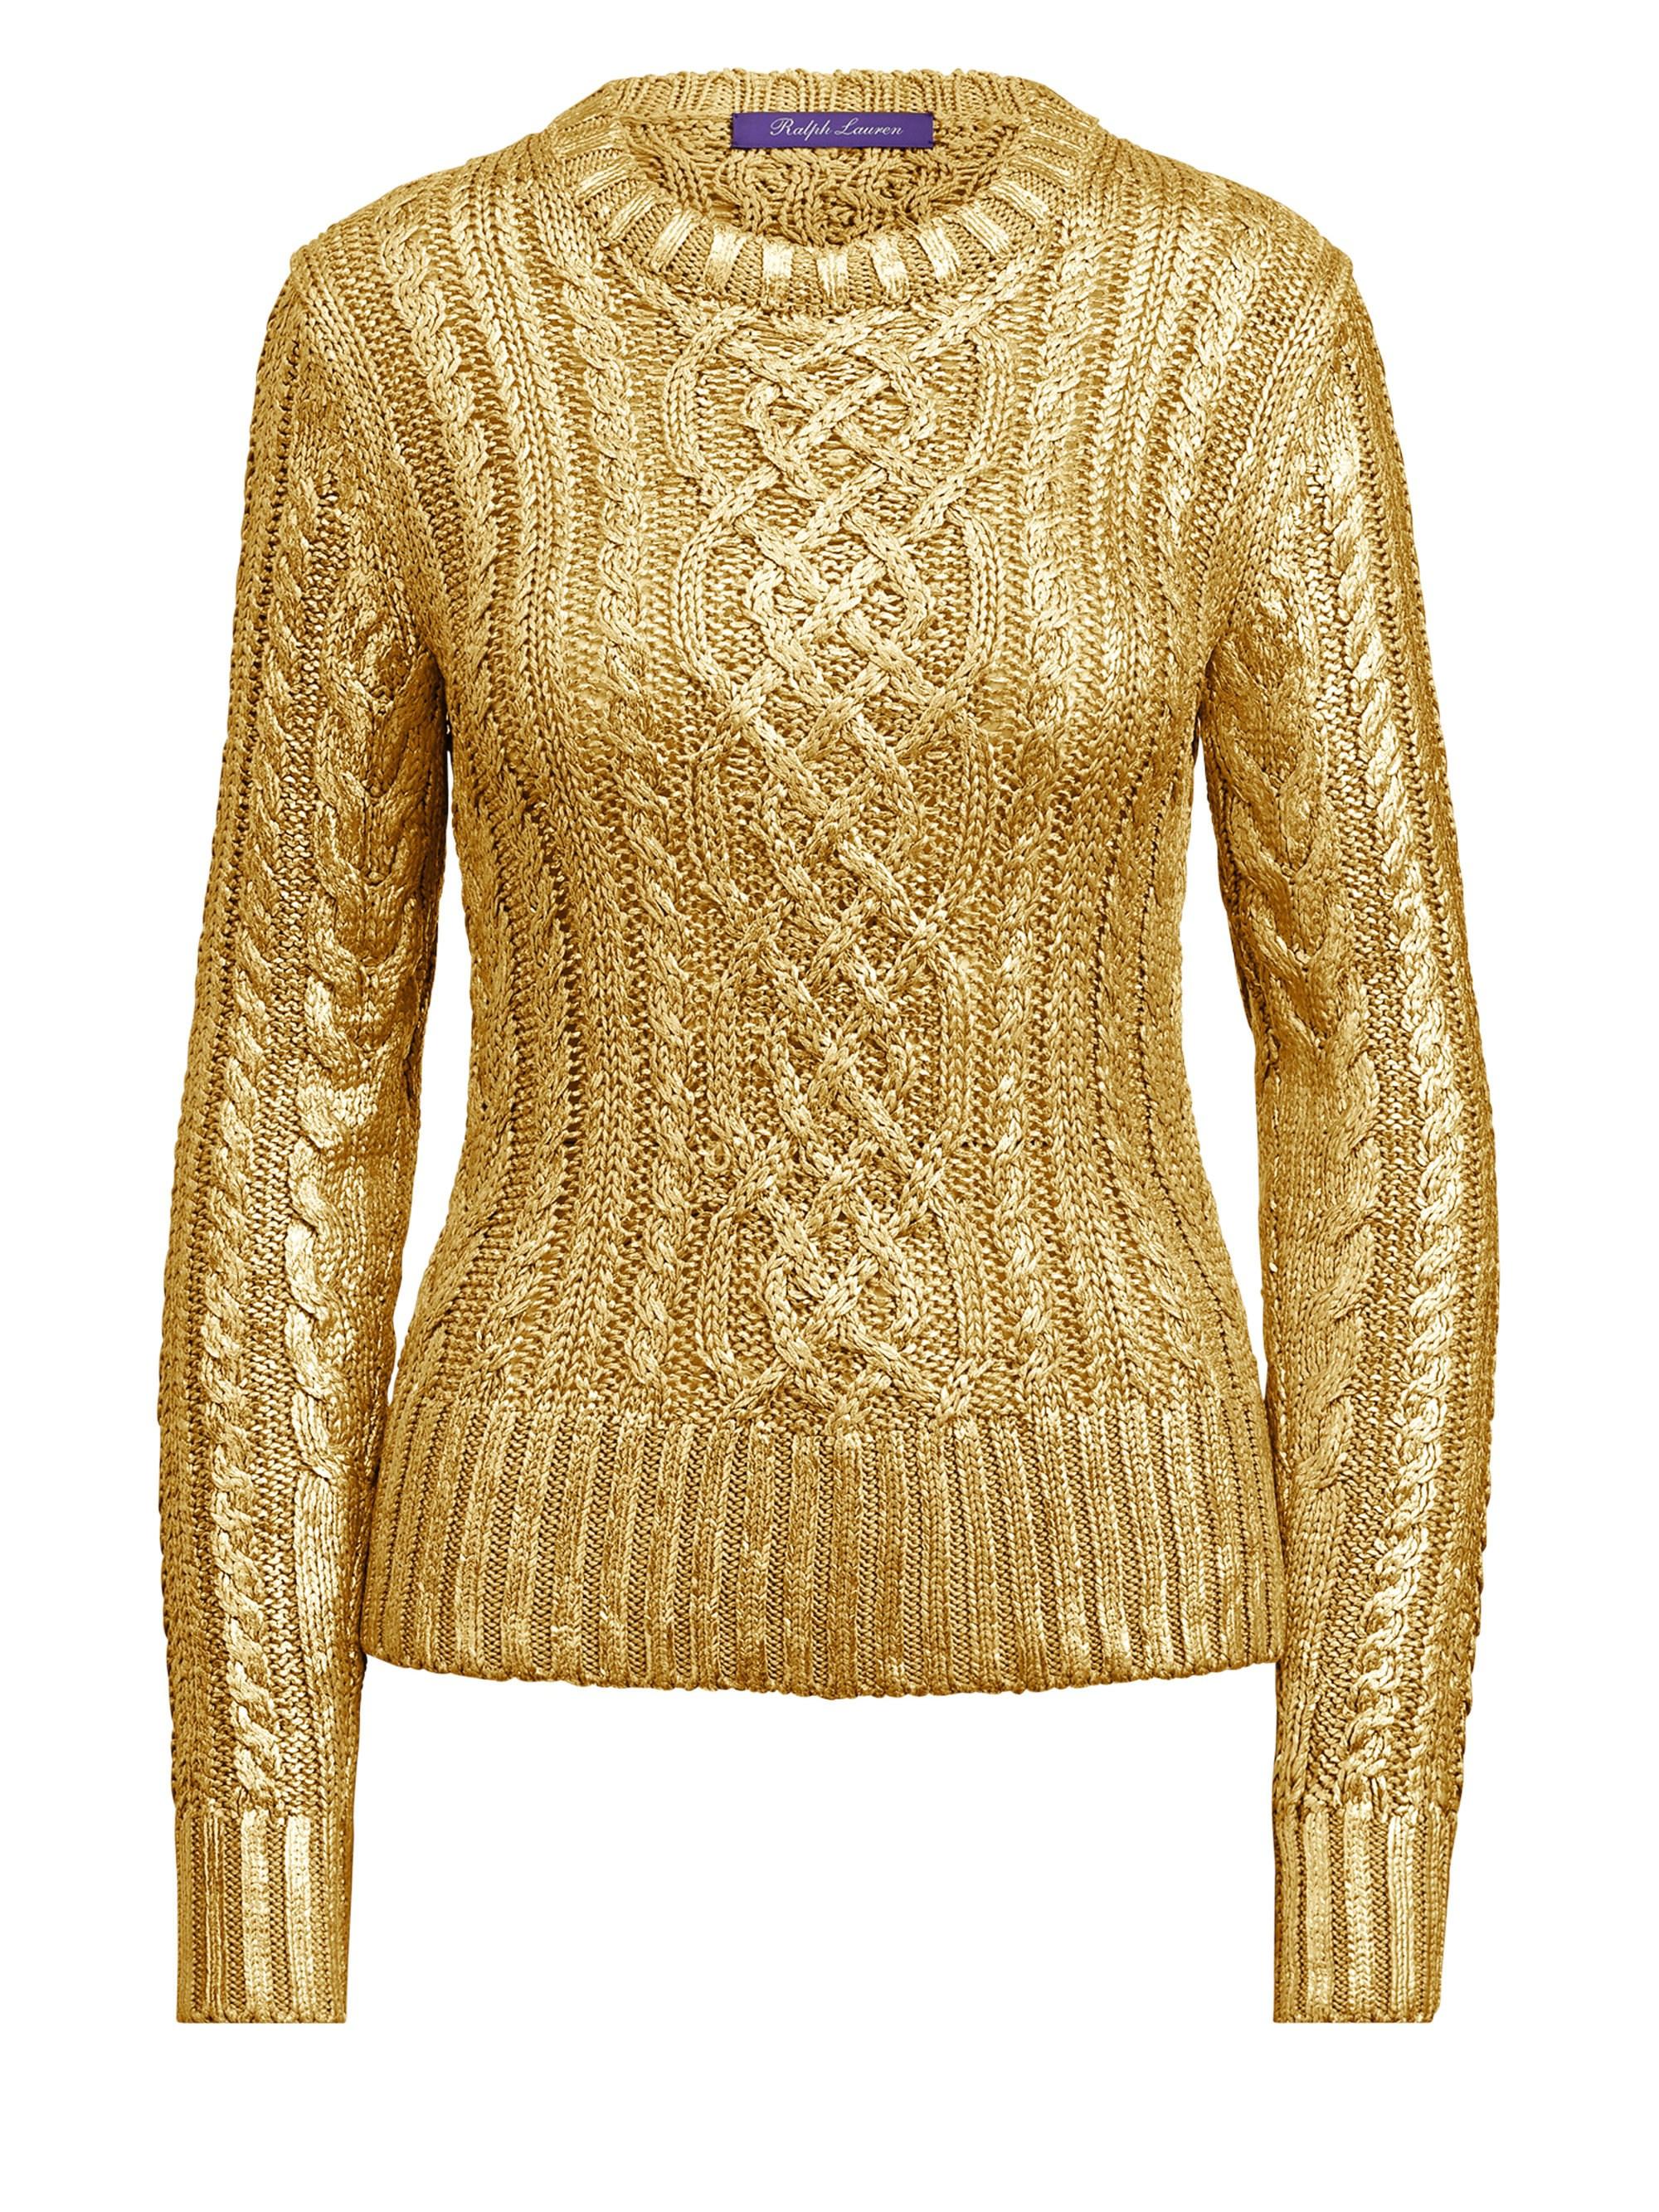 Ralph Lauren Collection Gold Foil Cable Knit Sweater in Metallic | Lyst